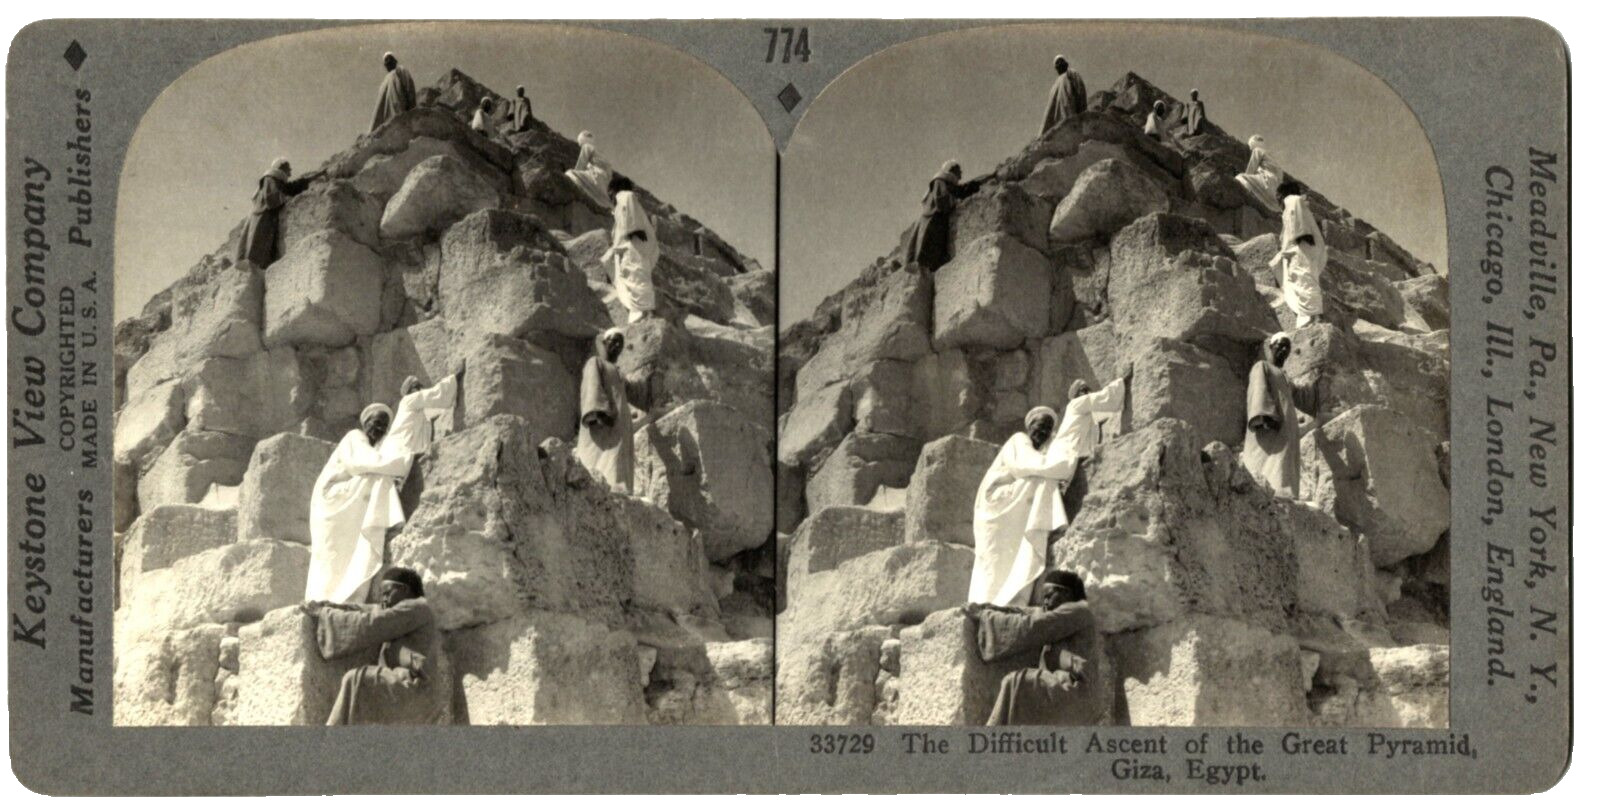 EGYPT ANTIQUE STEREOVIEW THE DIFFICULT ASCENT OF THE GREAT PYRAMID GIZA